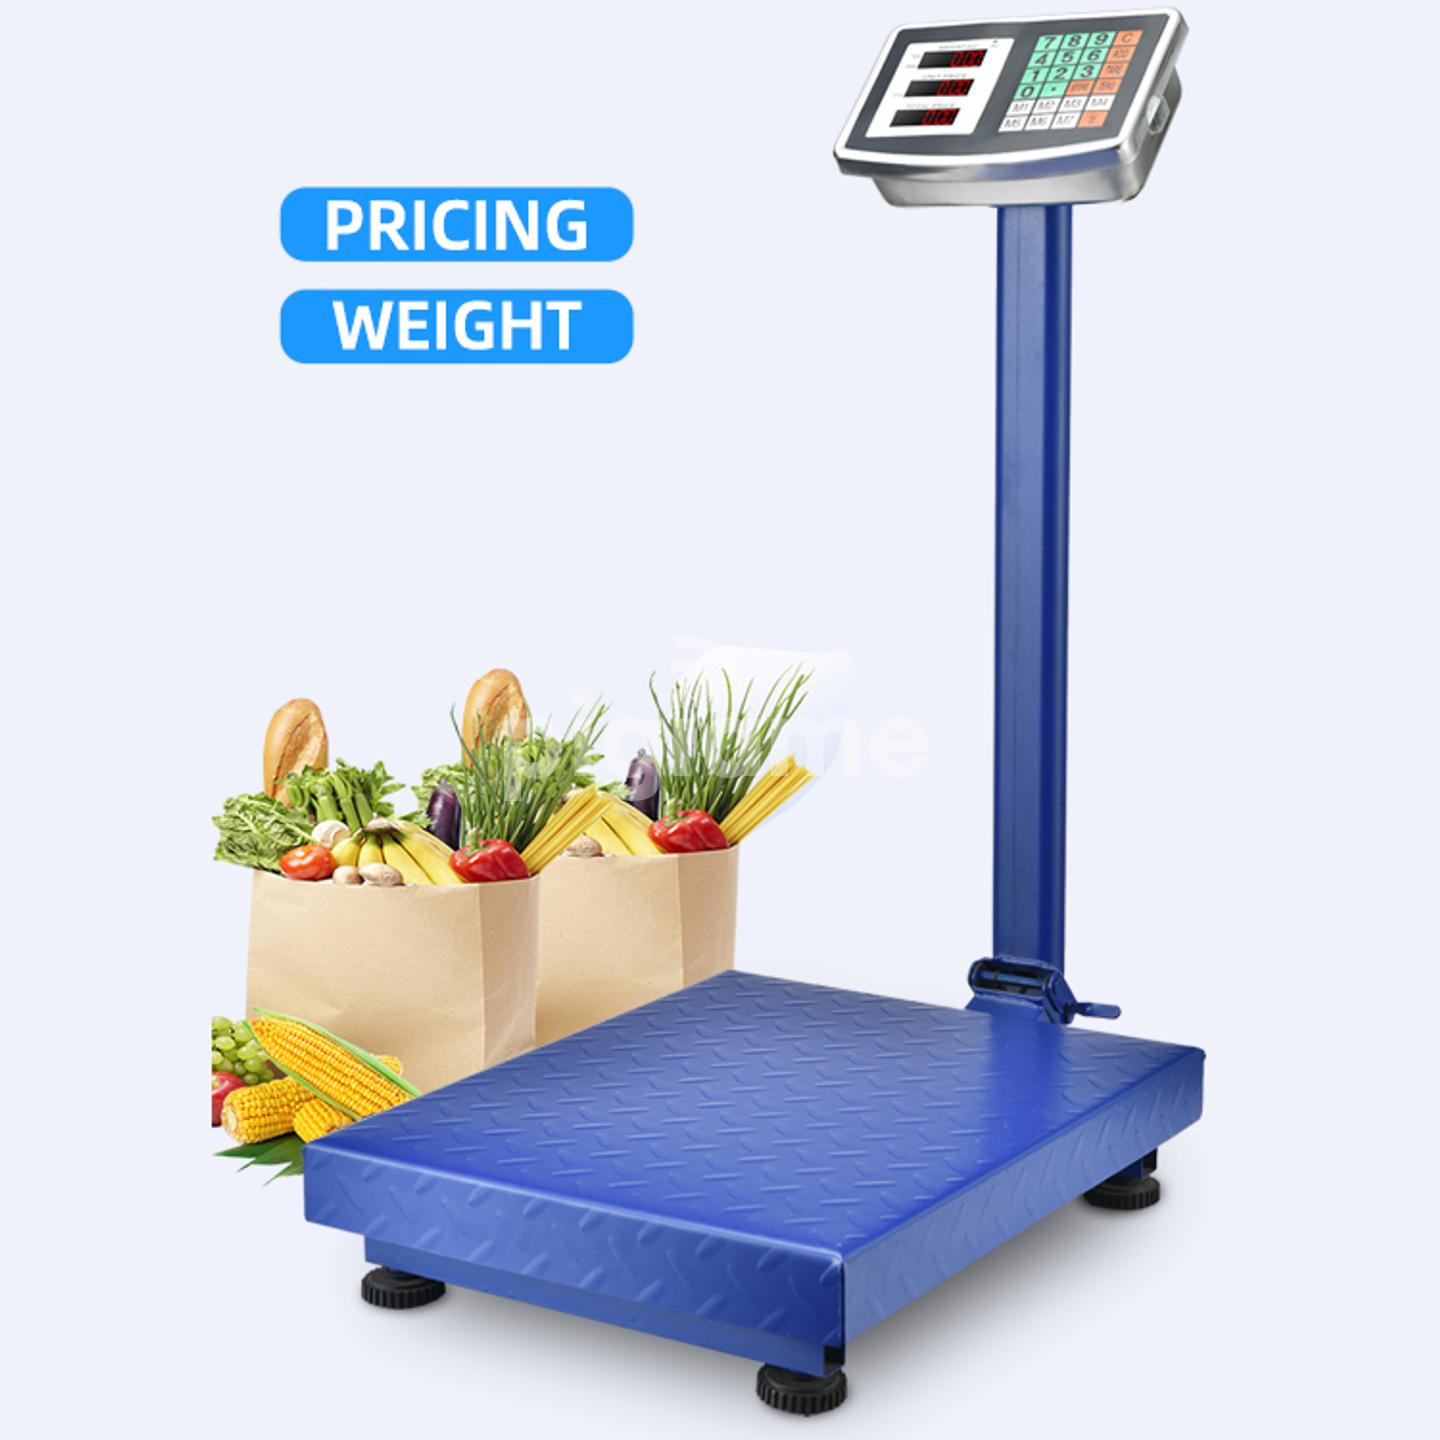 Platform Scale Industrial Scale Weighing Digital Price Count 150kg/10g 50x40cm 